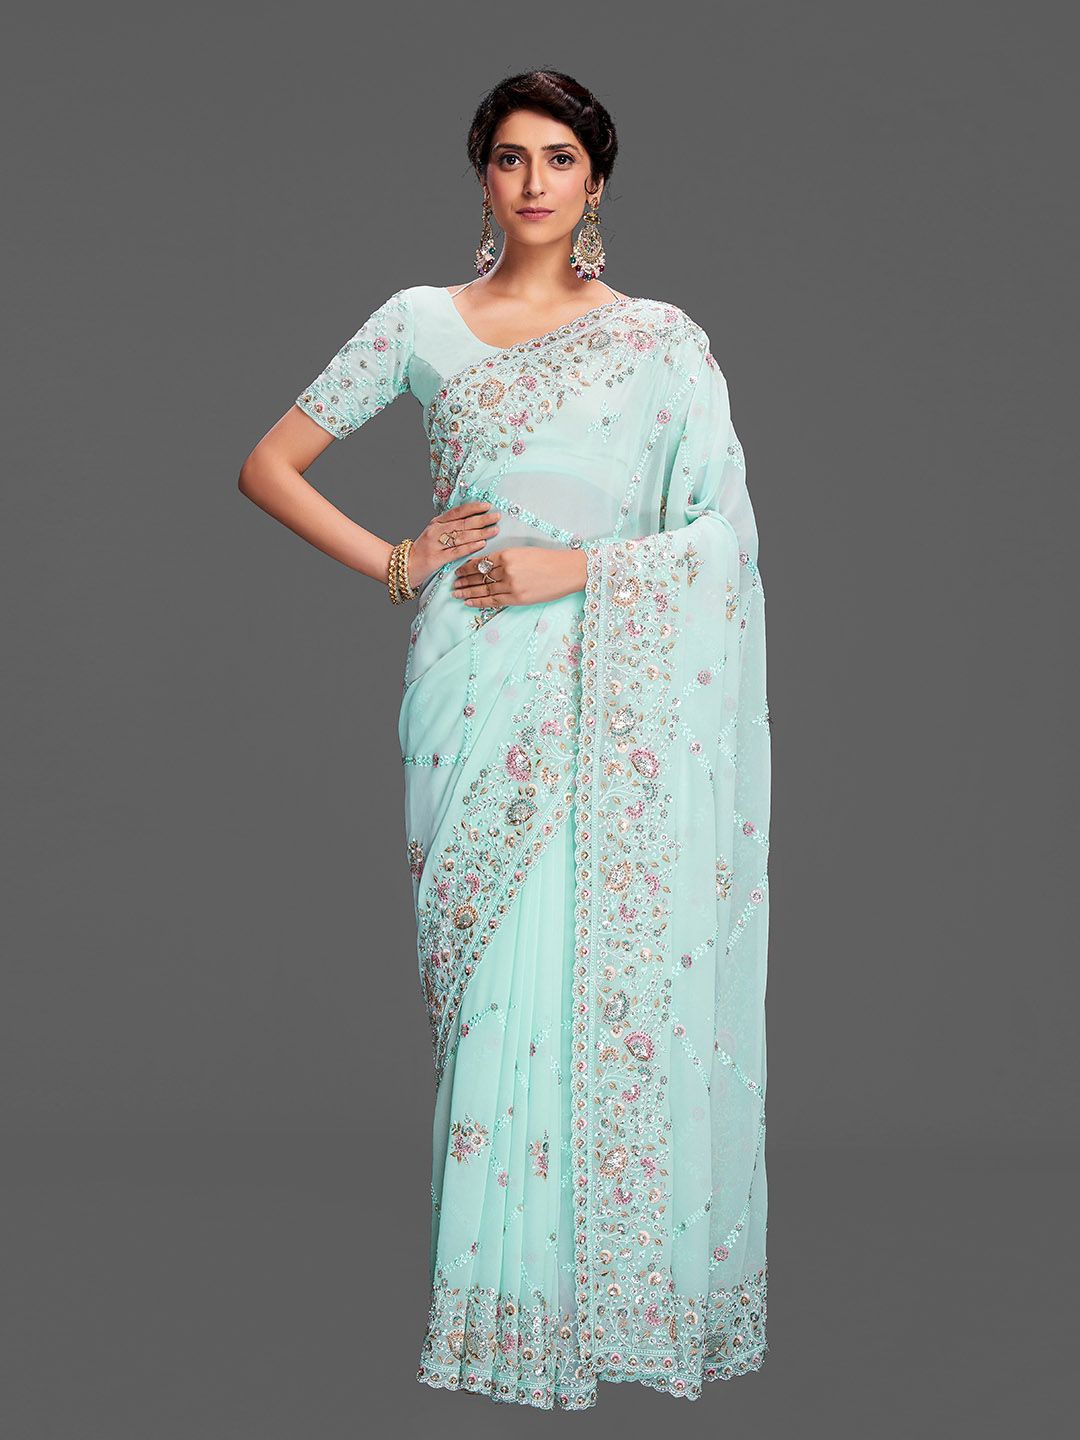 Fusionic Blue & Pink Floral Embroidered Pure Georgette Saree Price in India